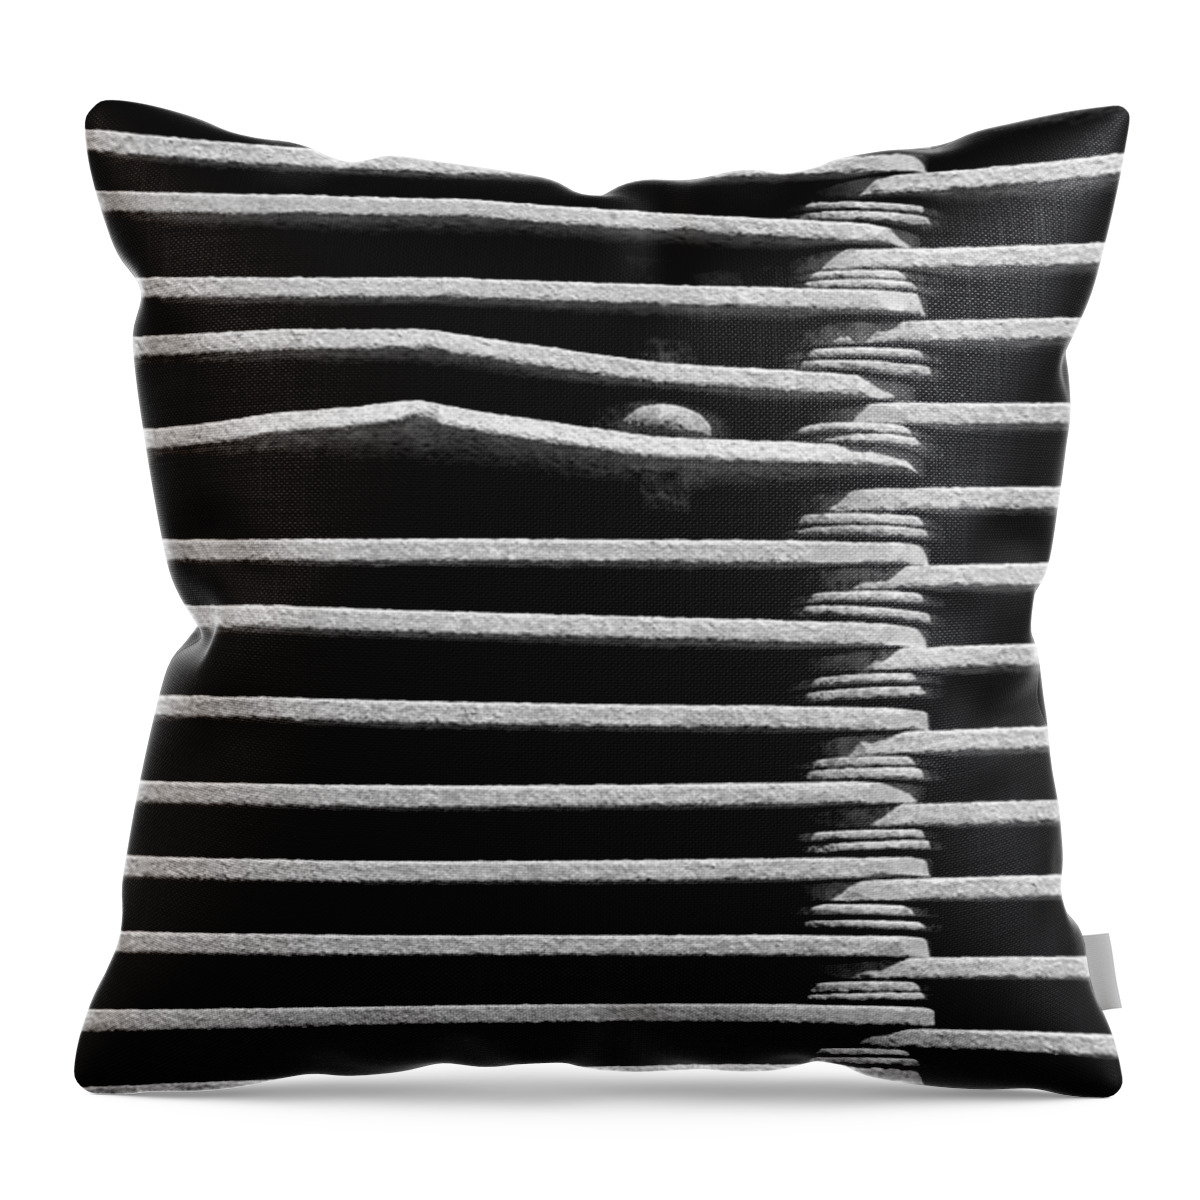 Grate Drain Steel Iron Black White Monochrome Throw Pillow featuring the photograph Old Grate 7428 by Ken DePue